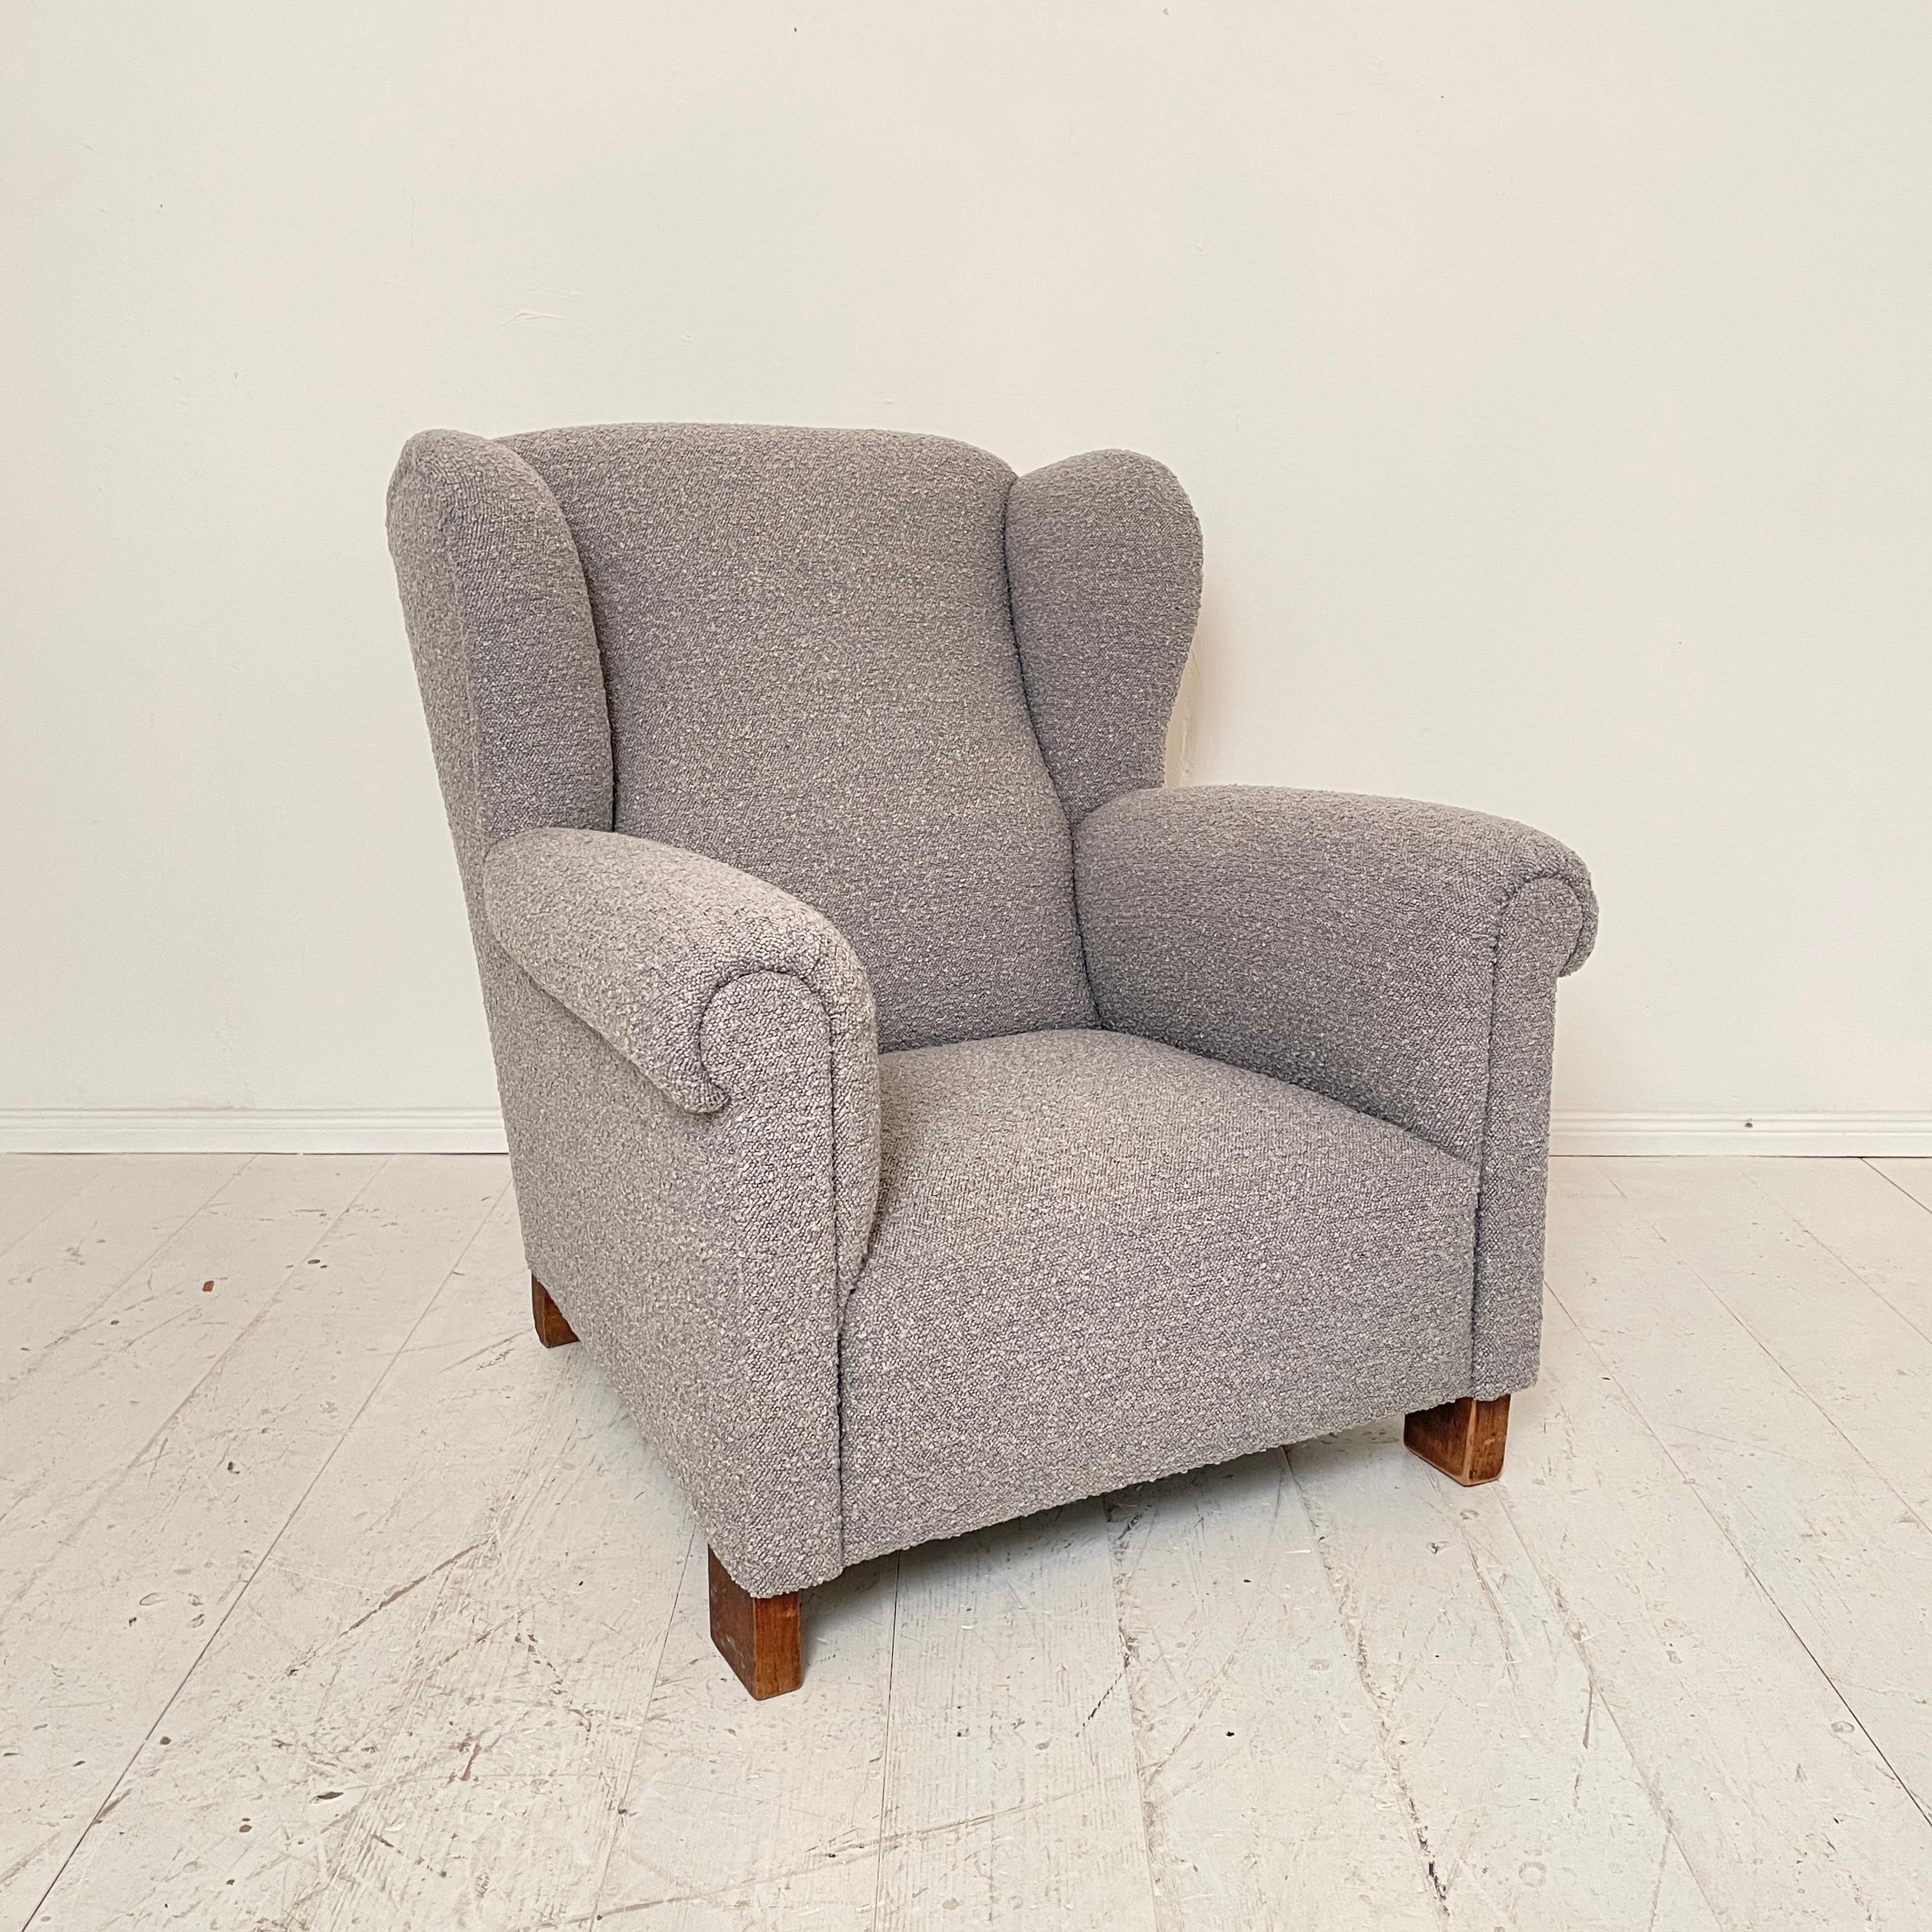 This great wingback chair from the 1920s has been completely reupholstered and covered with a high quality gray boucle fabric. 
The armchair is very comfortable and a great highlight for your home.
A unique piece which is a great eye-catcher for